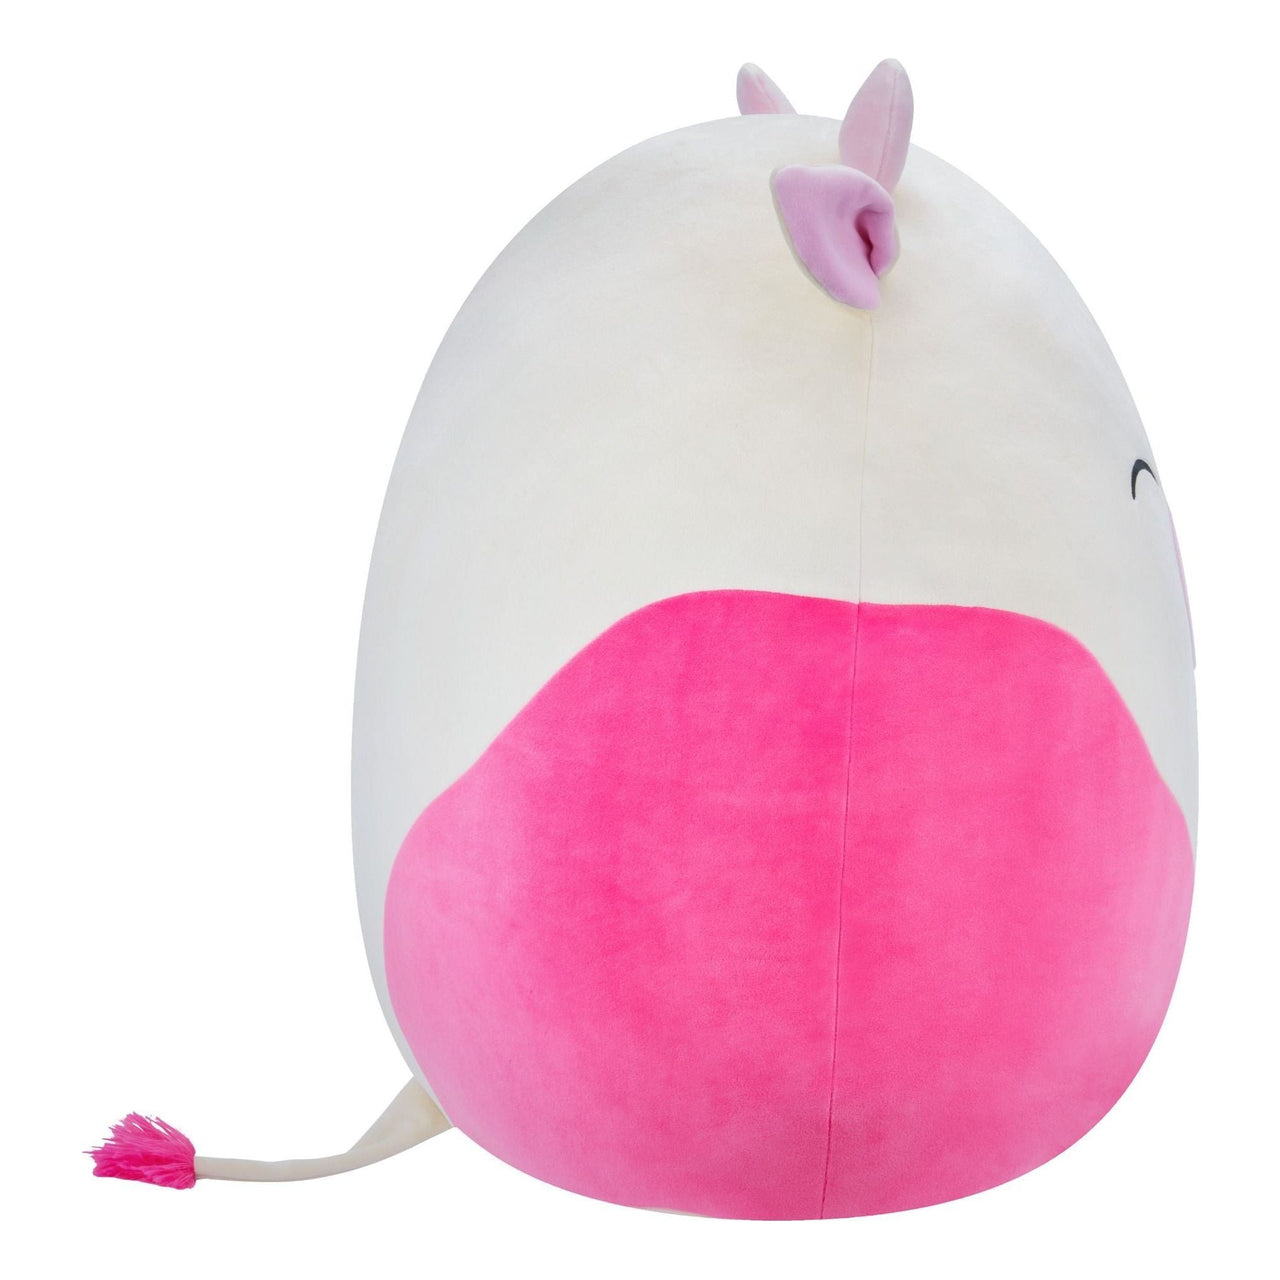 Squishmallows 16" Caedyn the Pink Spotted Cow Plush Squishmallows